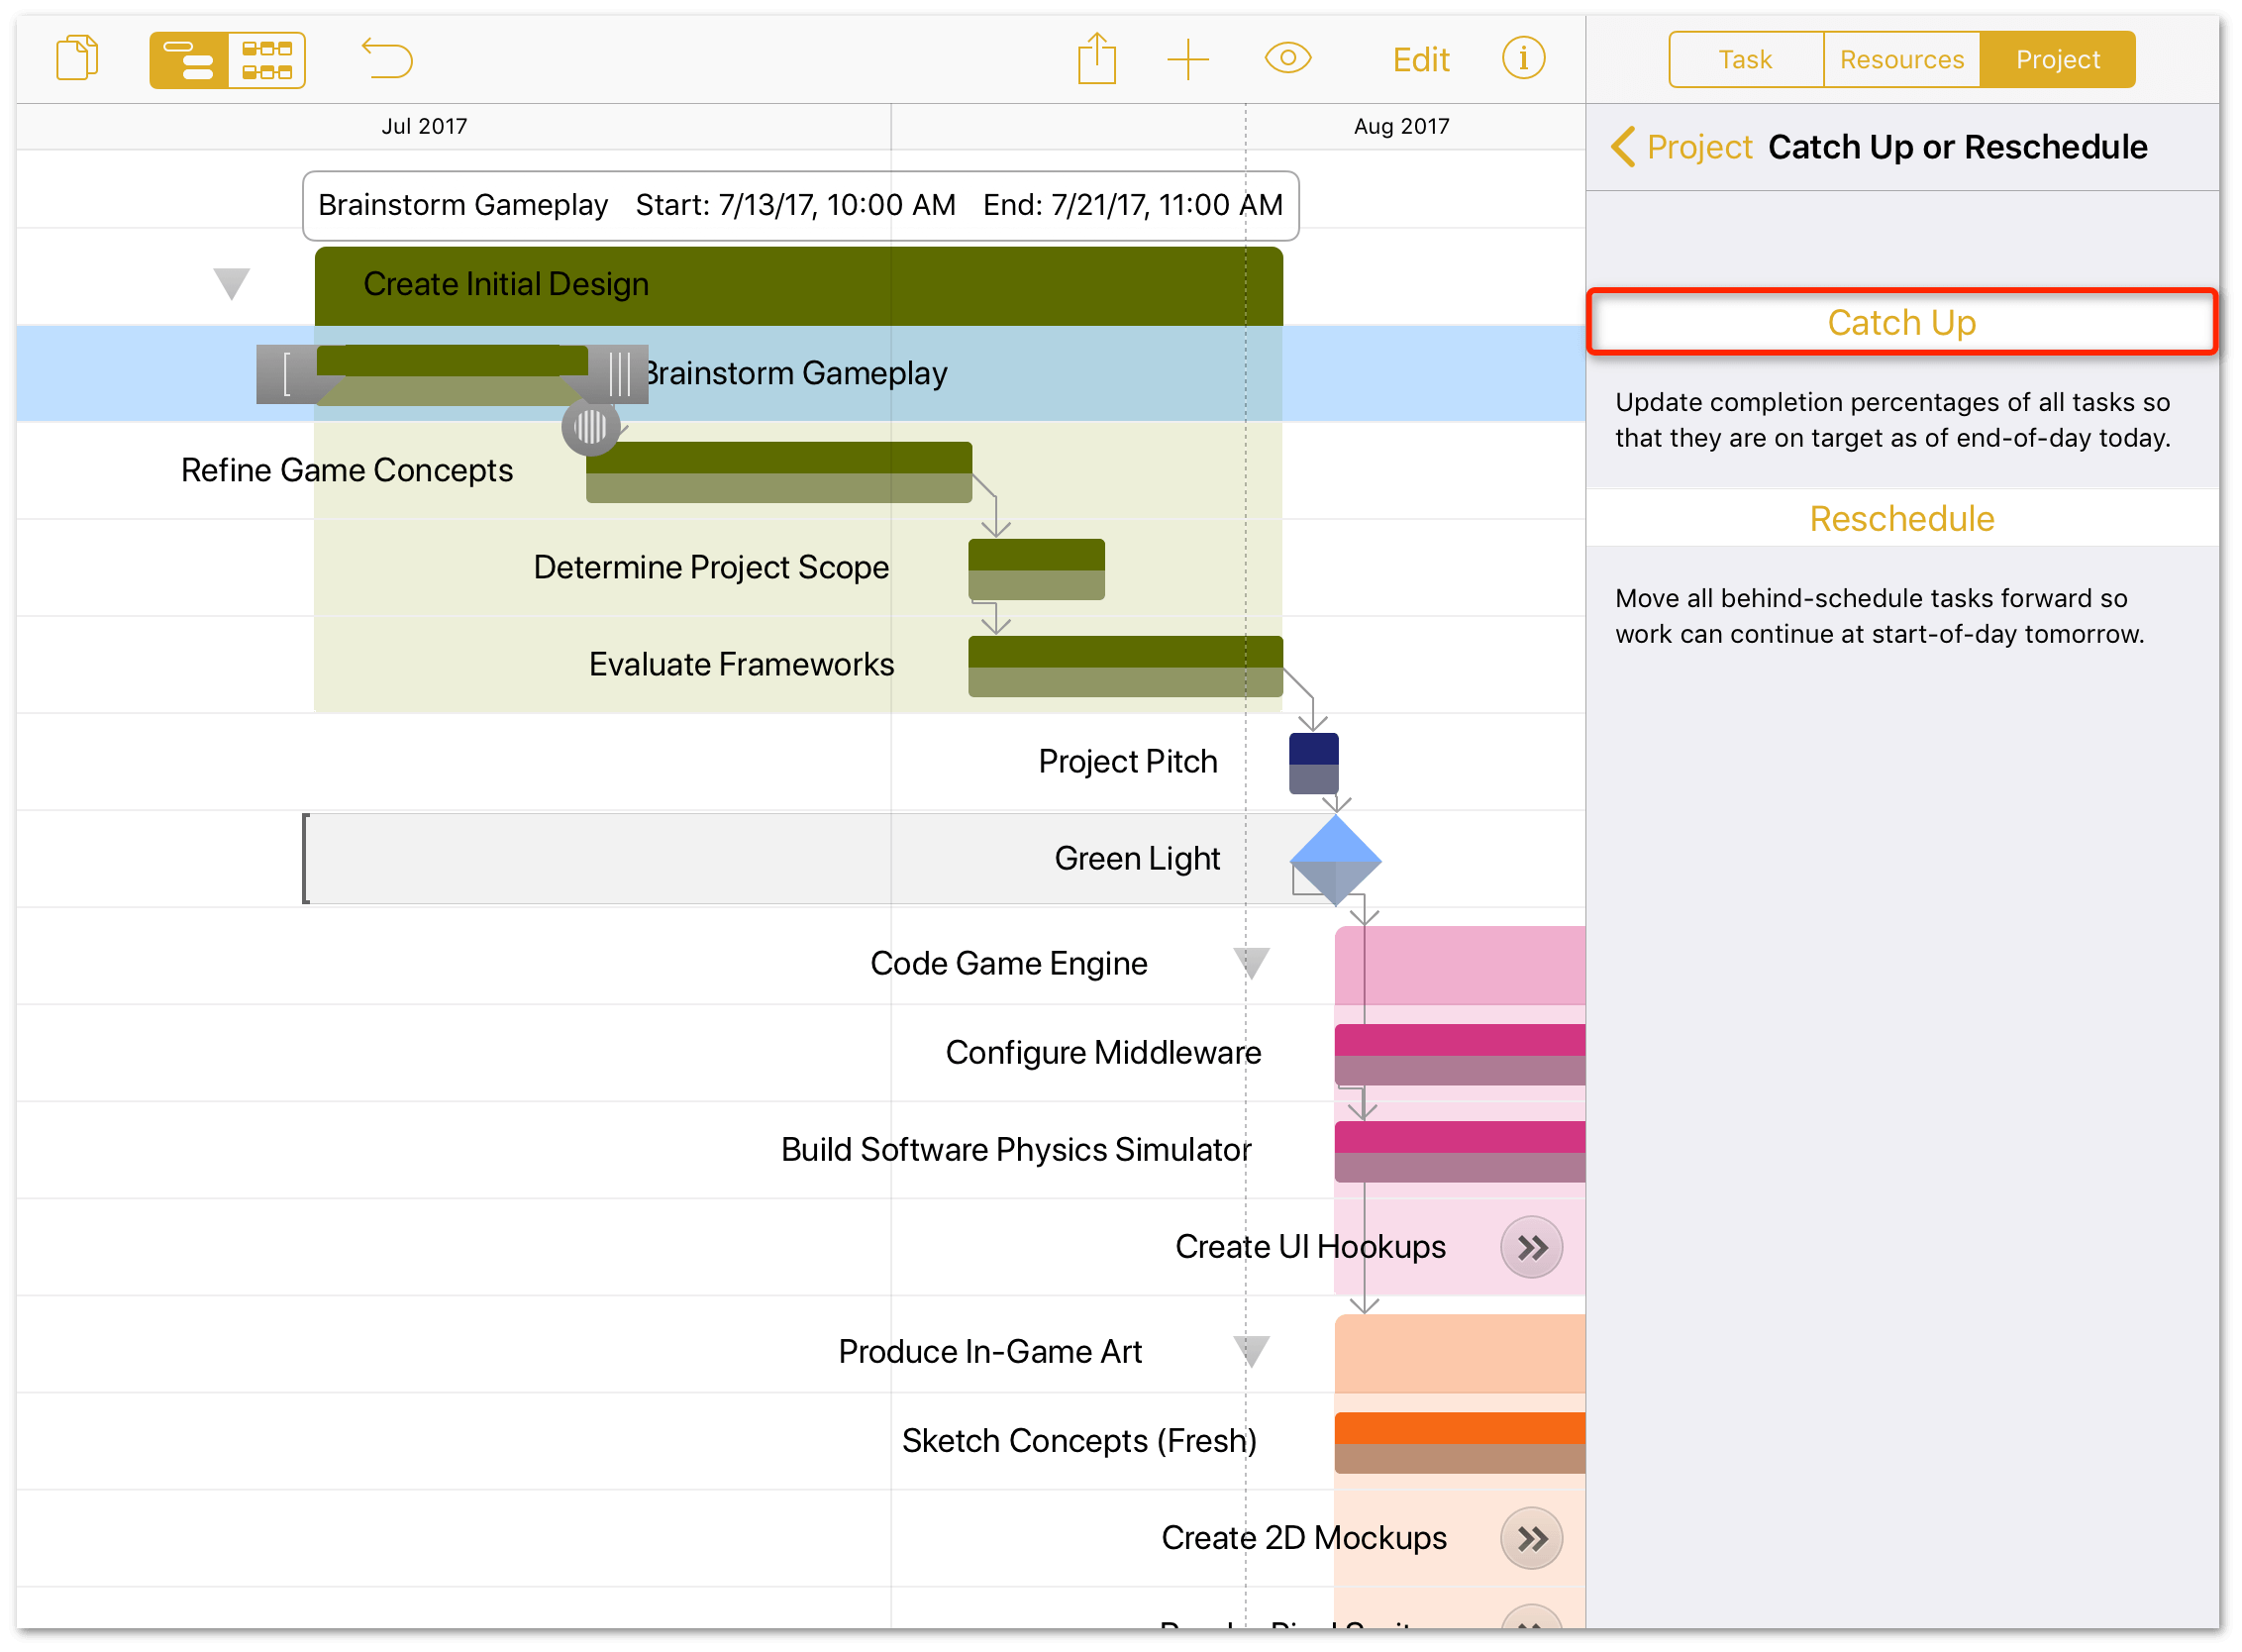 Updating task completion with the Catch Up tool.